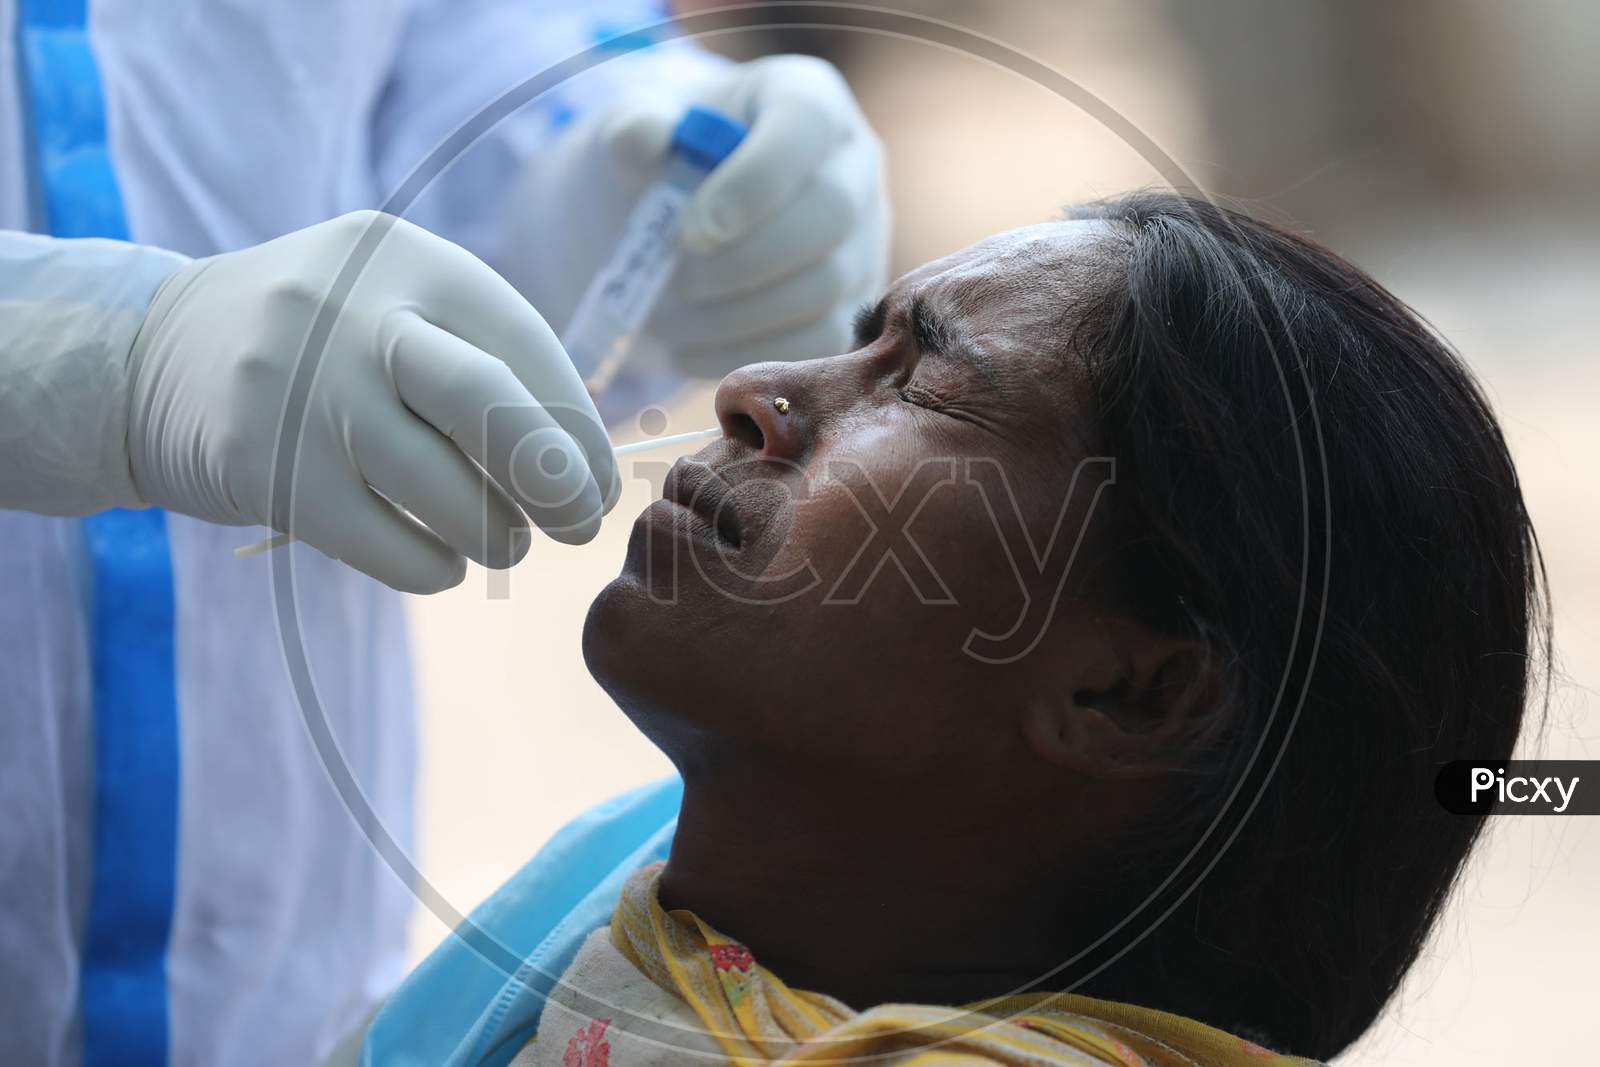 A health worker collects a swab sample from a woman for Covid-19 testing in Maratha Basti, Jammu on July 16, 2020